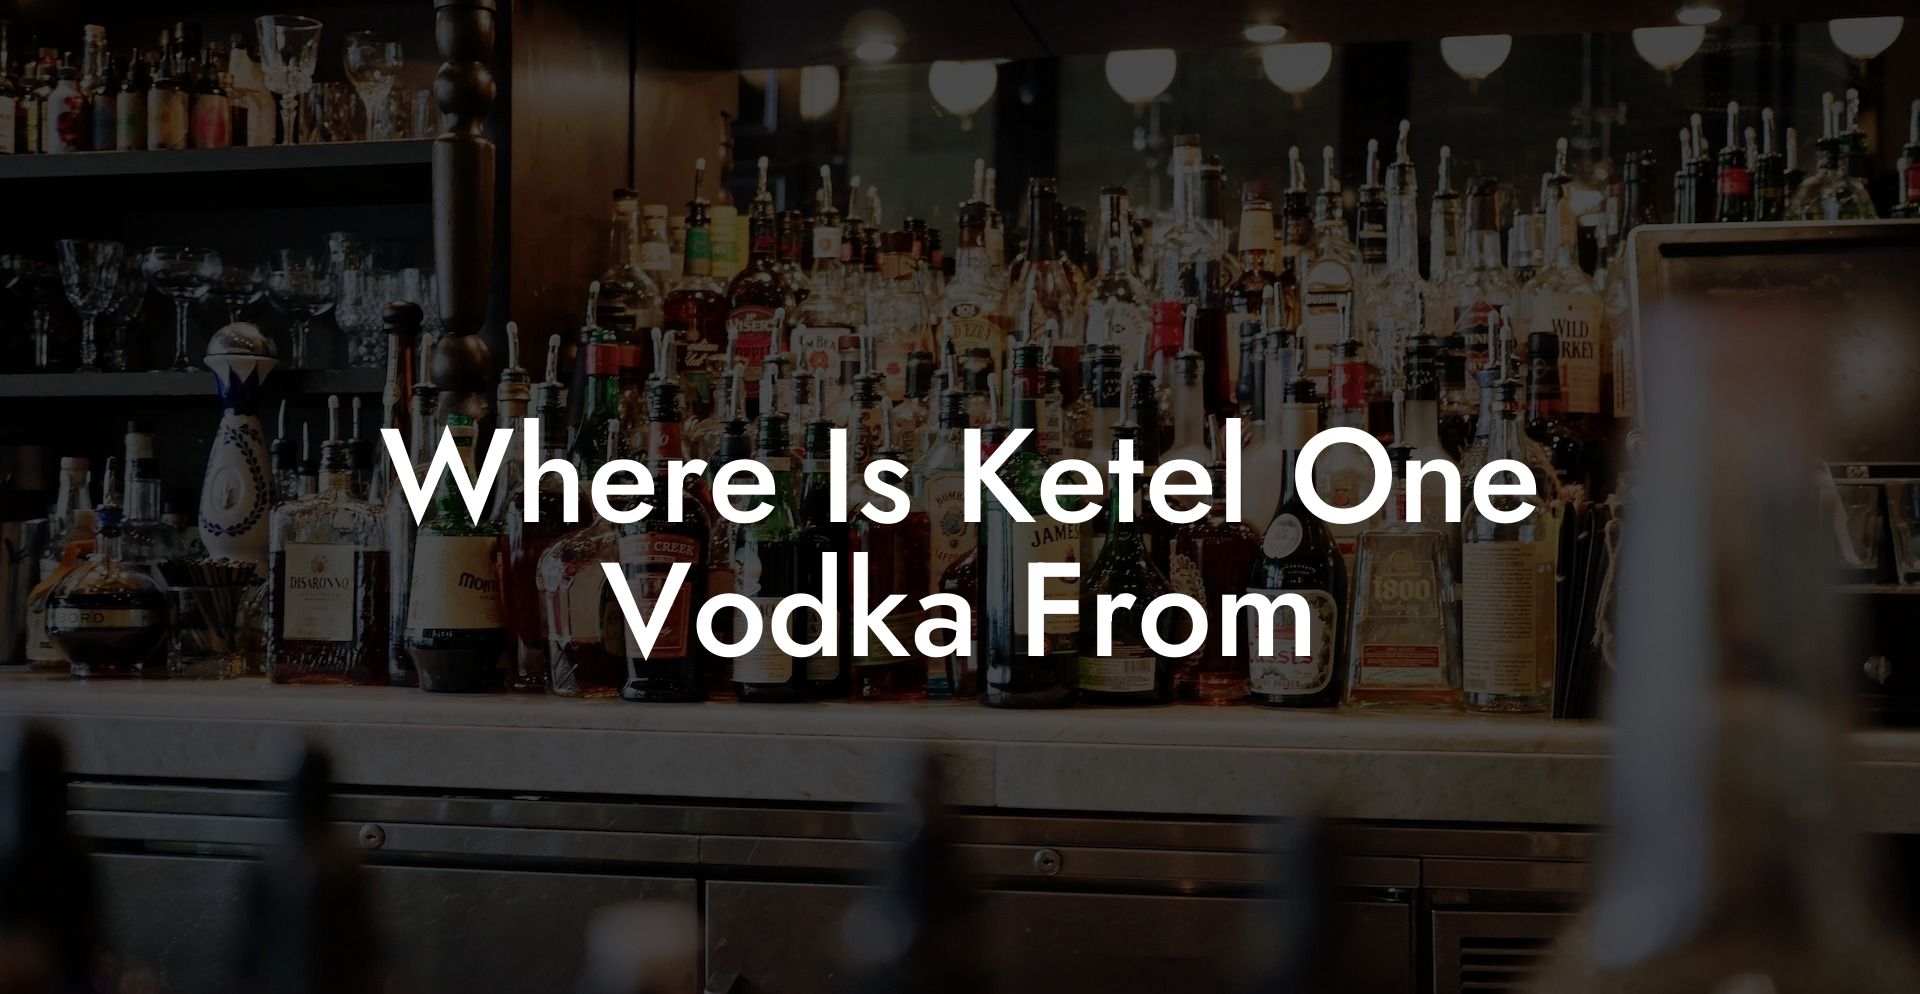 Where Is Ketel One Vodka From